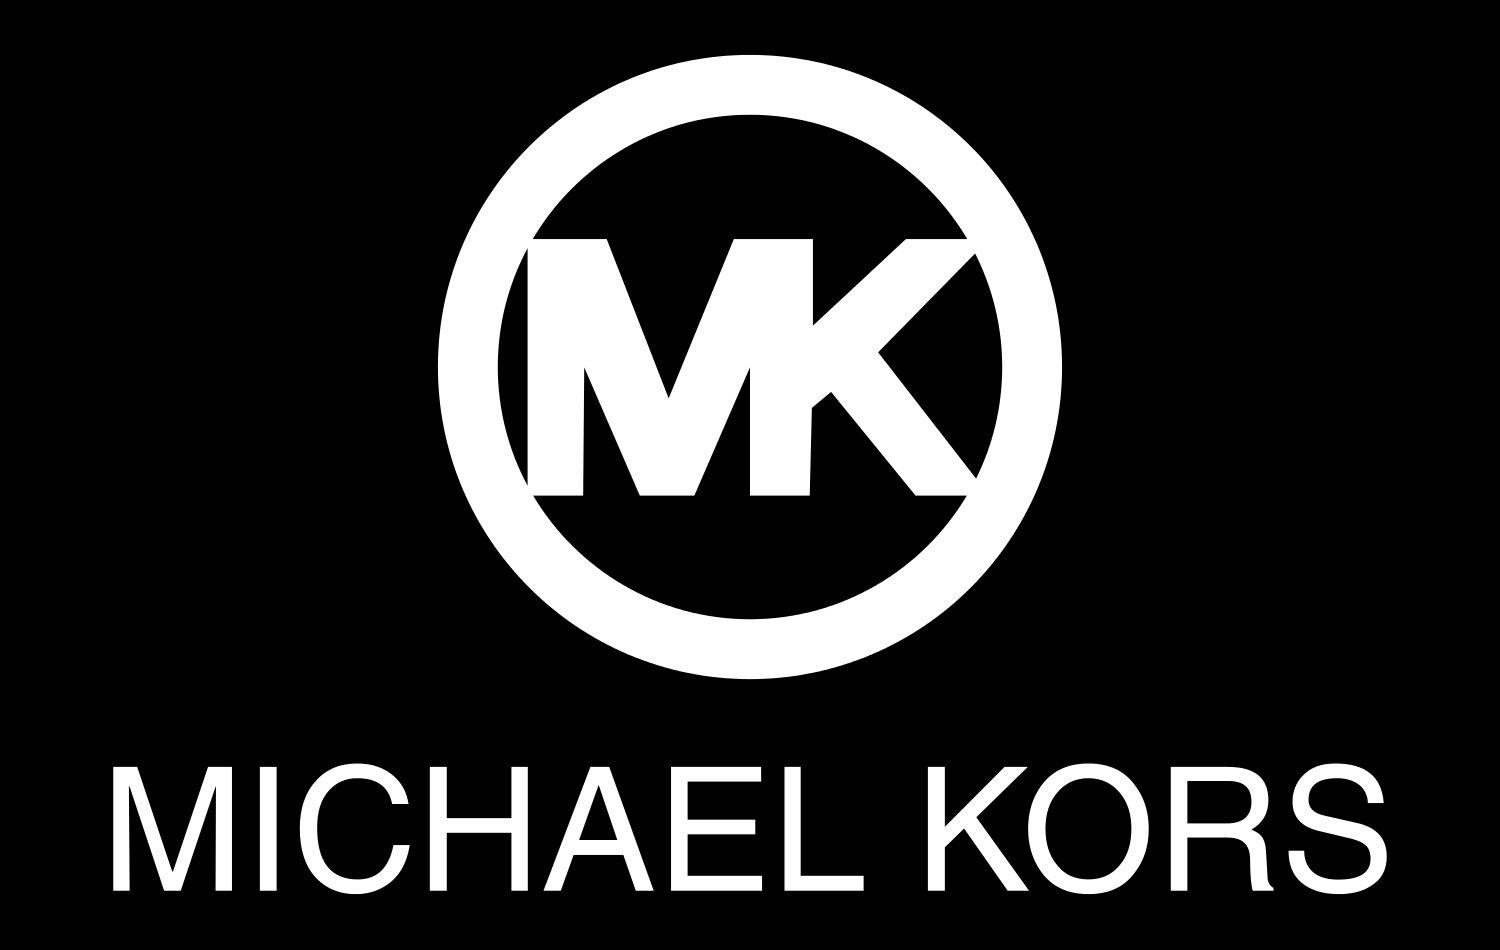 Michael Kors MK Logo - Michael Kors Logo, Michael Kors Symbol, Meaning, History and Evolution